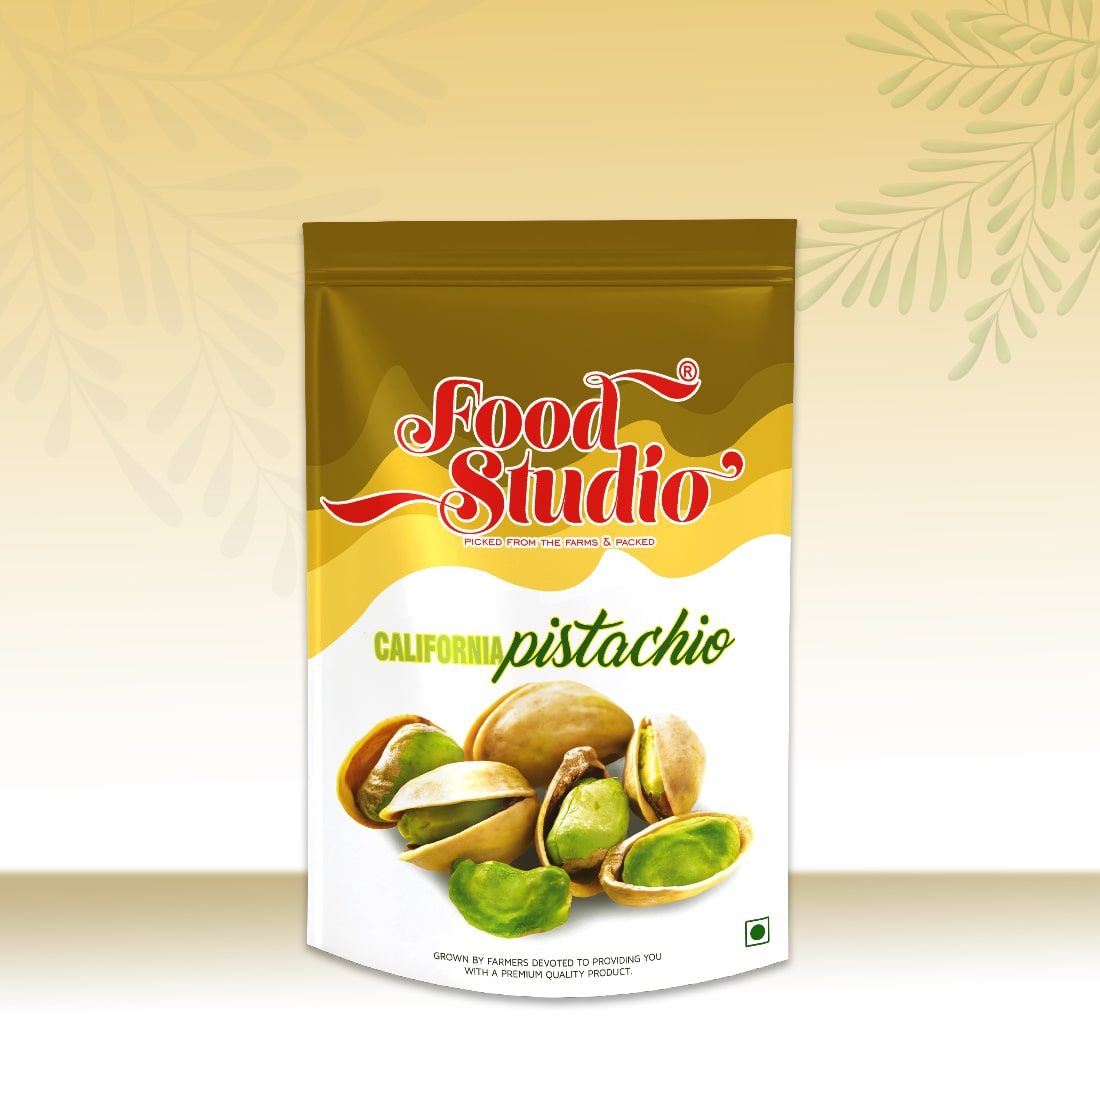 Food Studio Premium California Roasted & Salted Pistachios Yellow Pouch